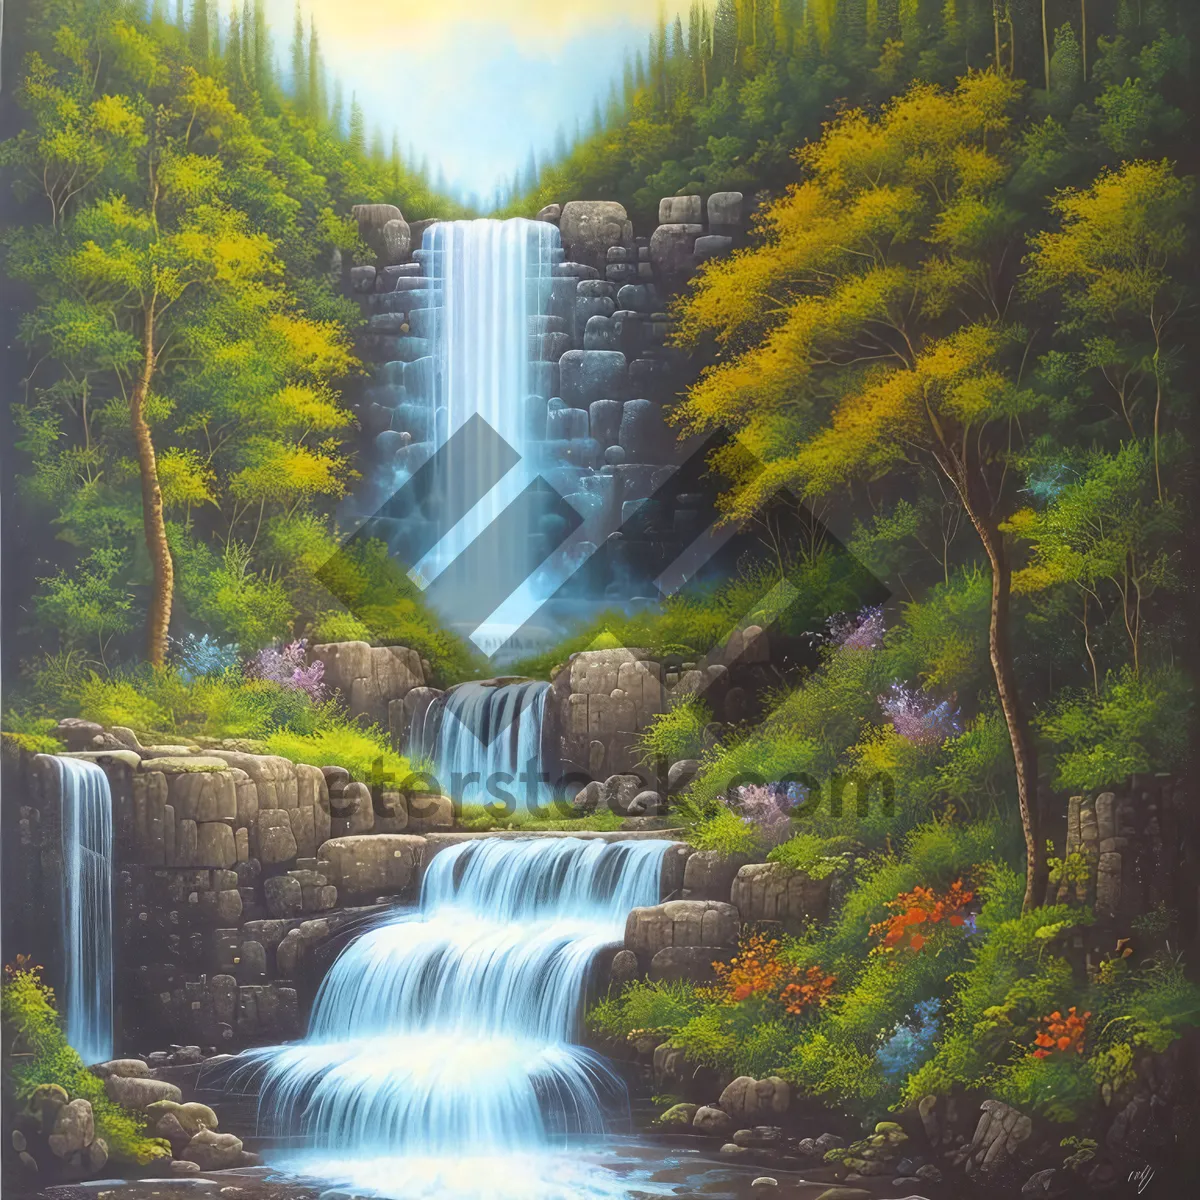 Picture of Serene Waterfall in Tranquil Park Setting